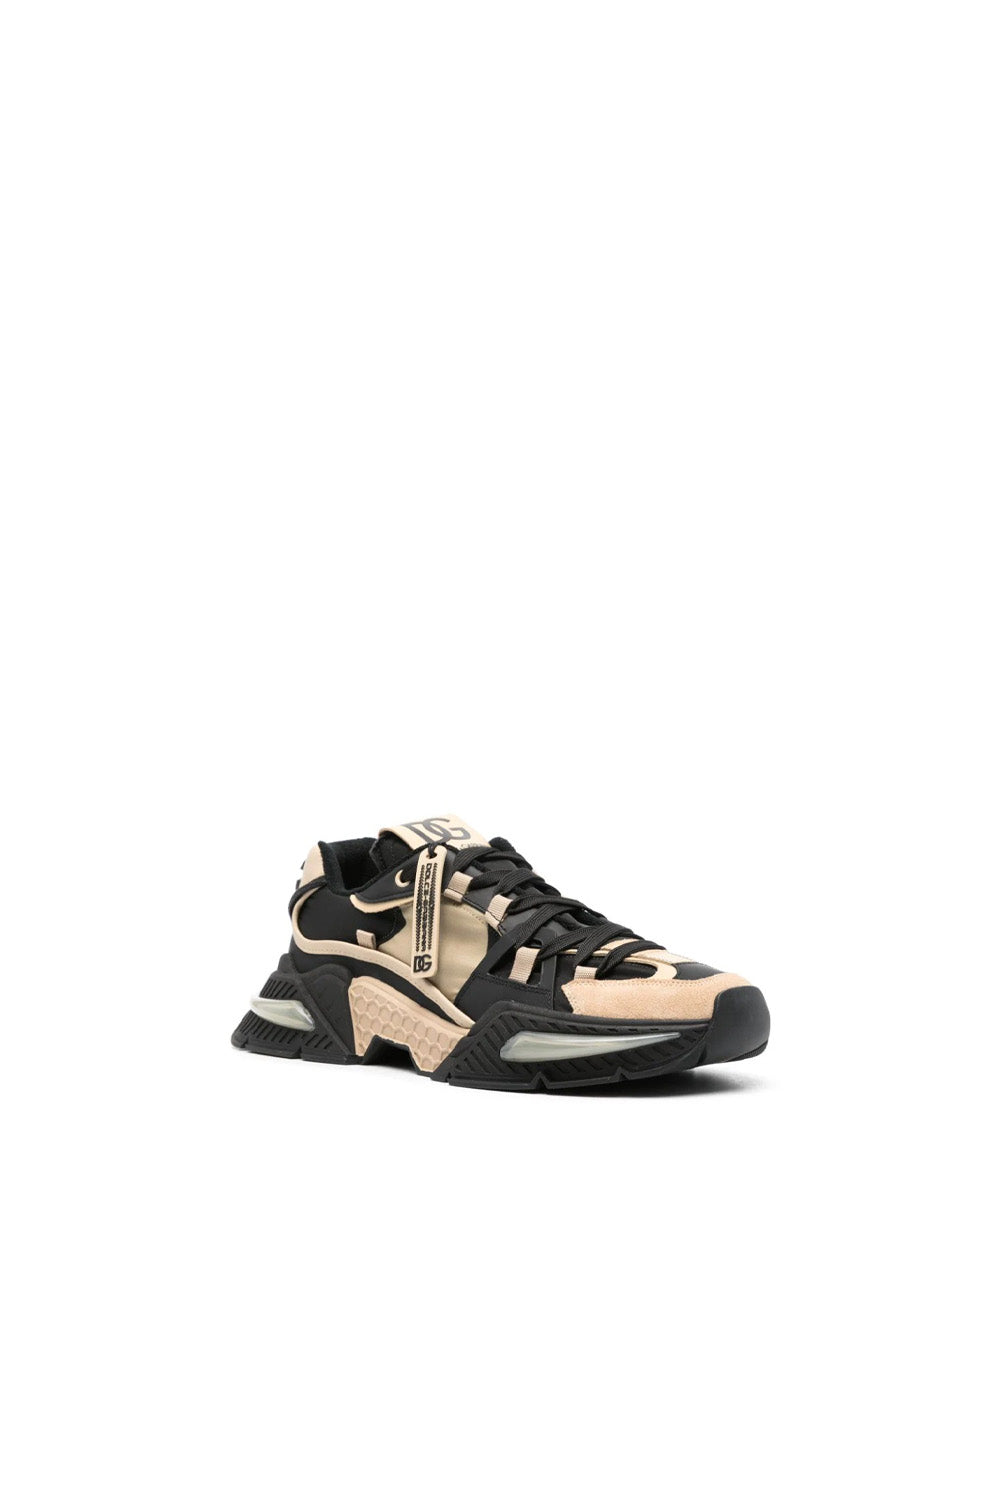 Dolce & Gabbana Airmaster contrasting-panel sneakers